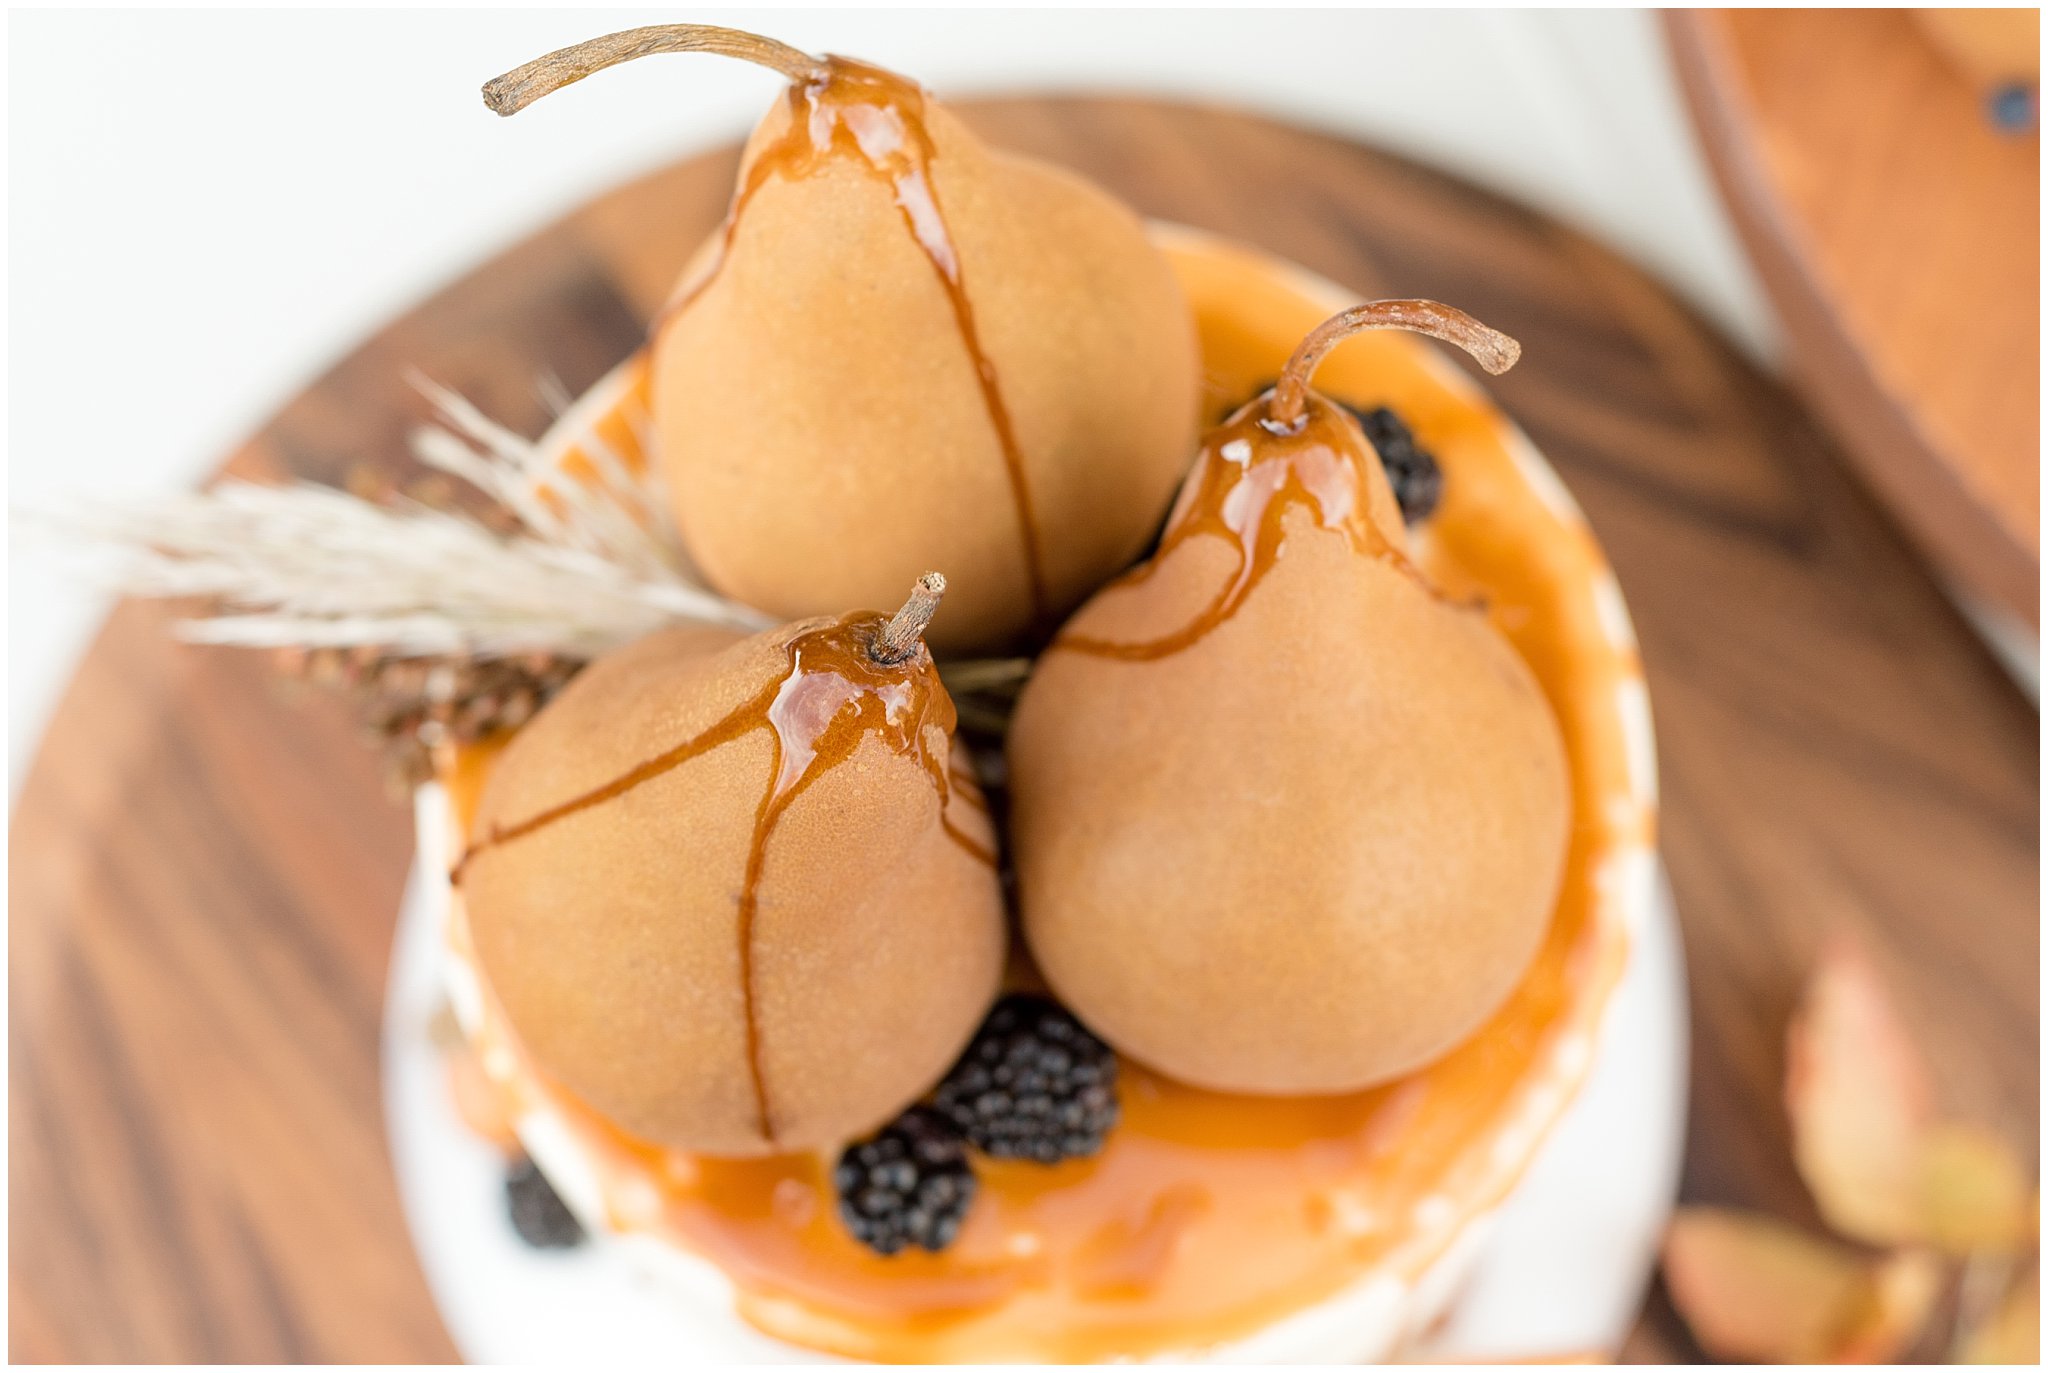 Drizzled caramel on pears and blackberries fall wedding cake inspiration | Jessie and Dallin Photography